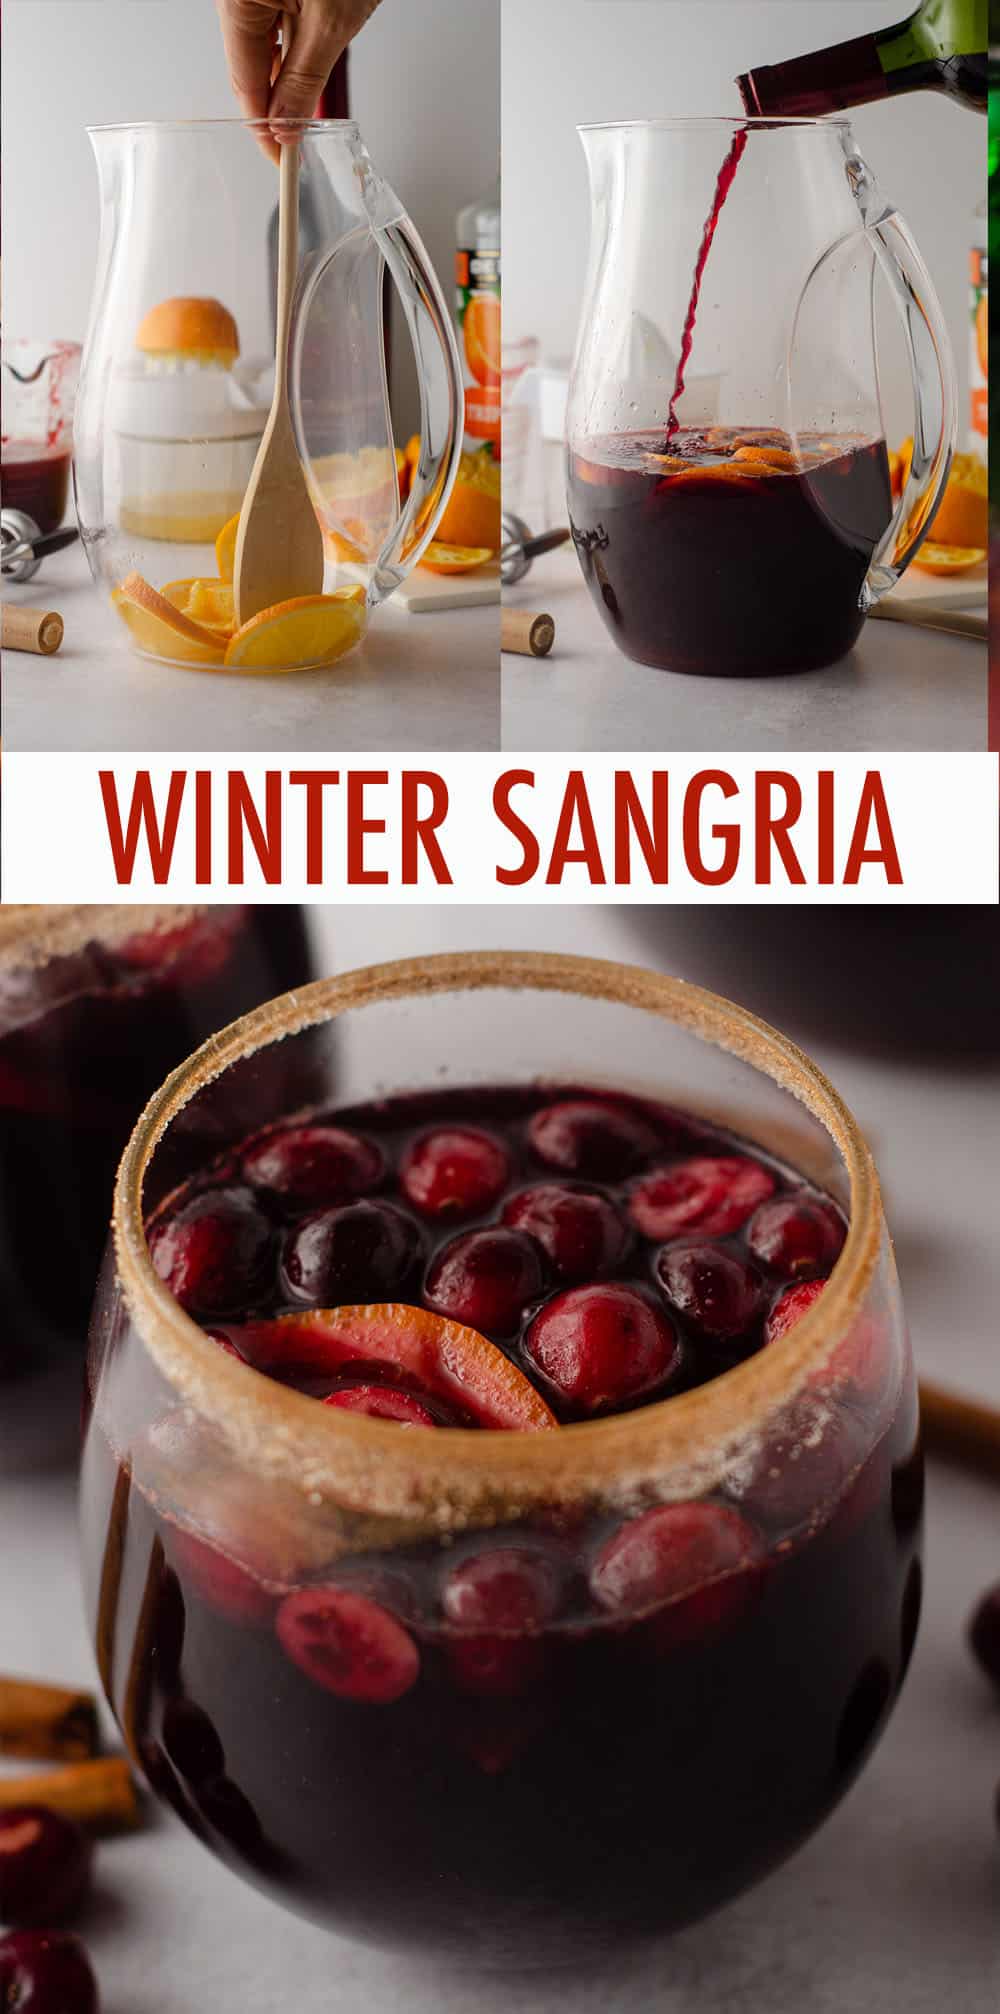 This spiced winter sangria is made with a mulled cranberry syrup, cinnamon and cloves, freshly squeezed orange juice, triple sec, and red wine. via @frshaprilflours